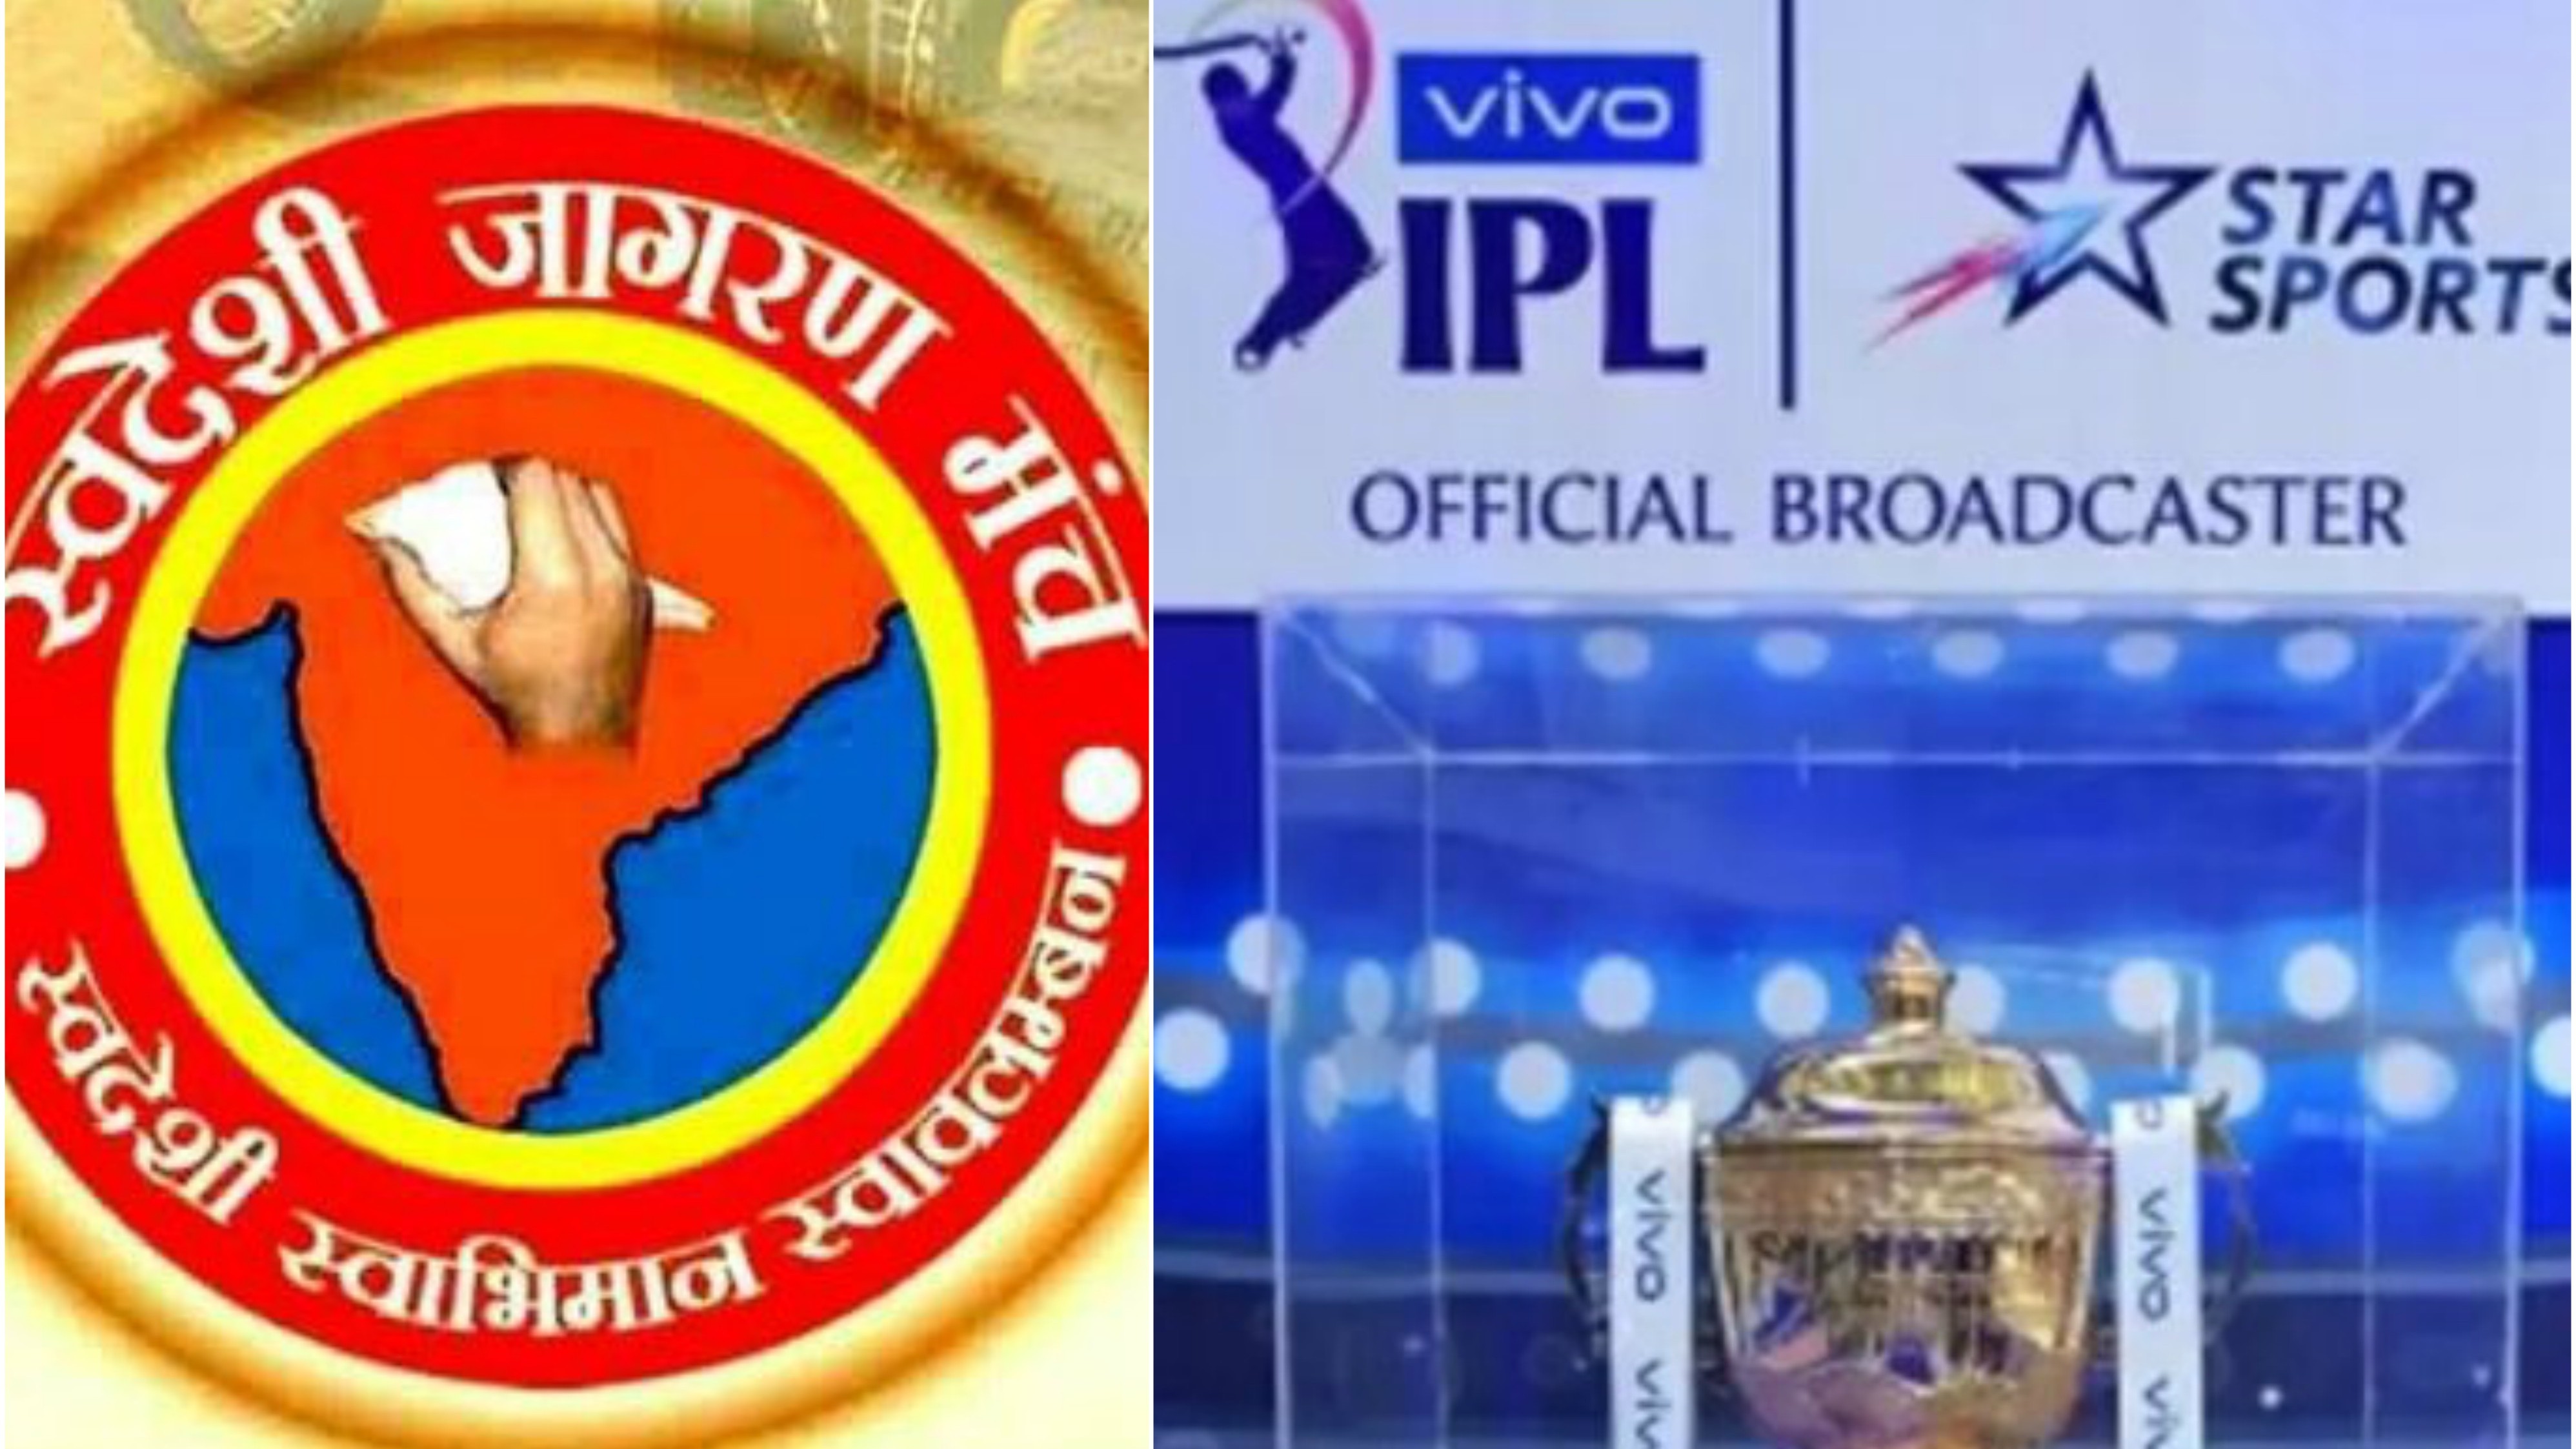 IPL 2020: Swadeshi Jagran Manch warns BCCI that IPL 13 will be boycotted, if Chinese sponsors continue